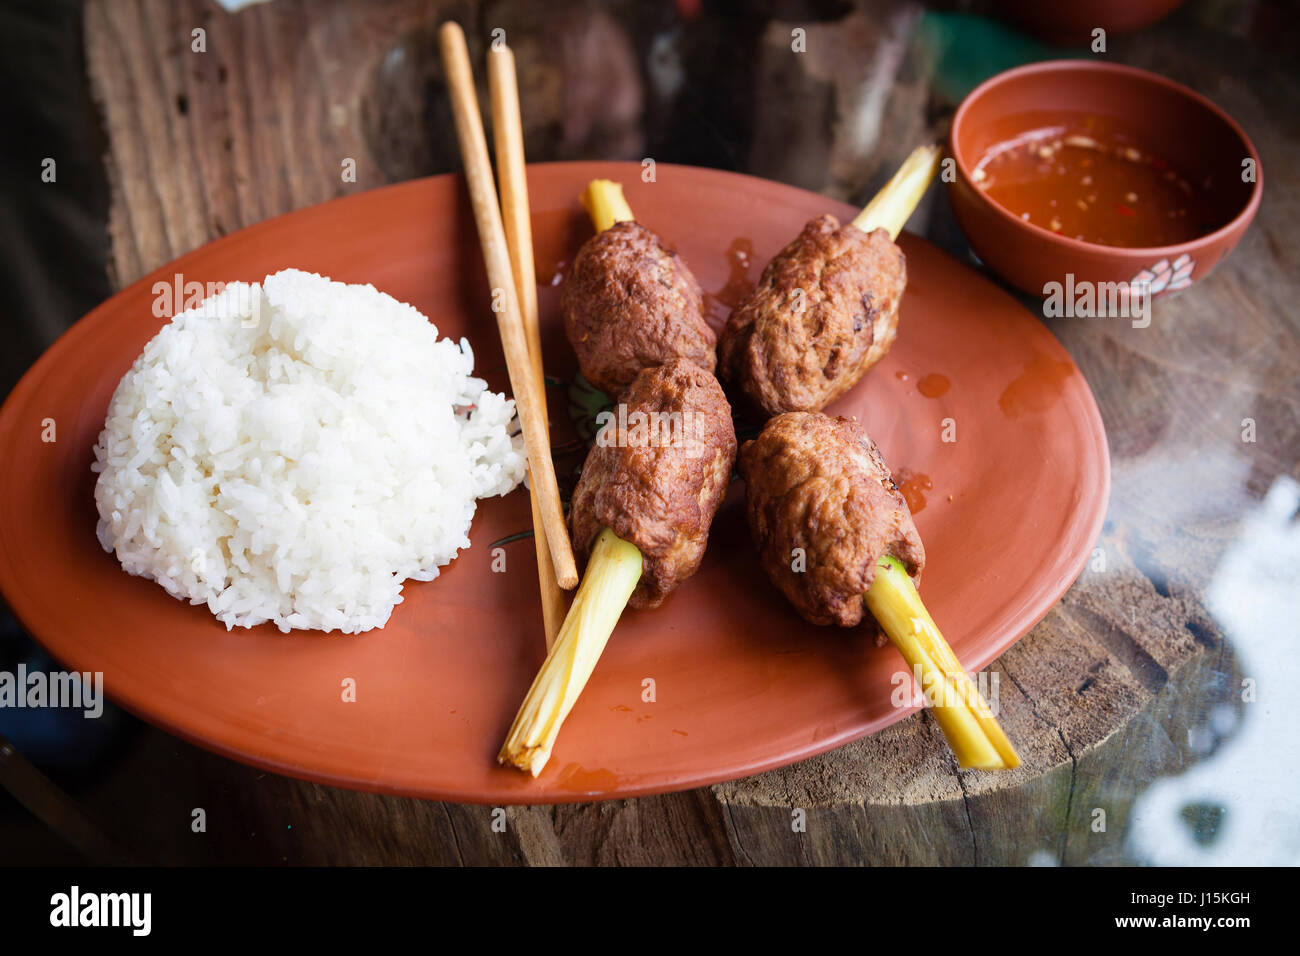 Phong Nha, Vietnam - march 9 2017: local food on plate Stock Photo